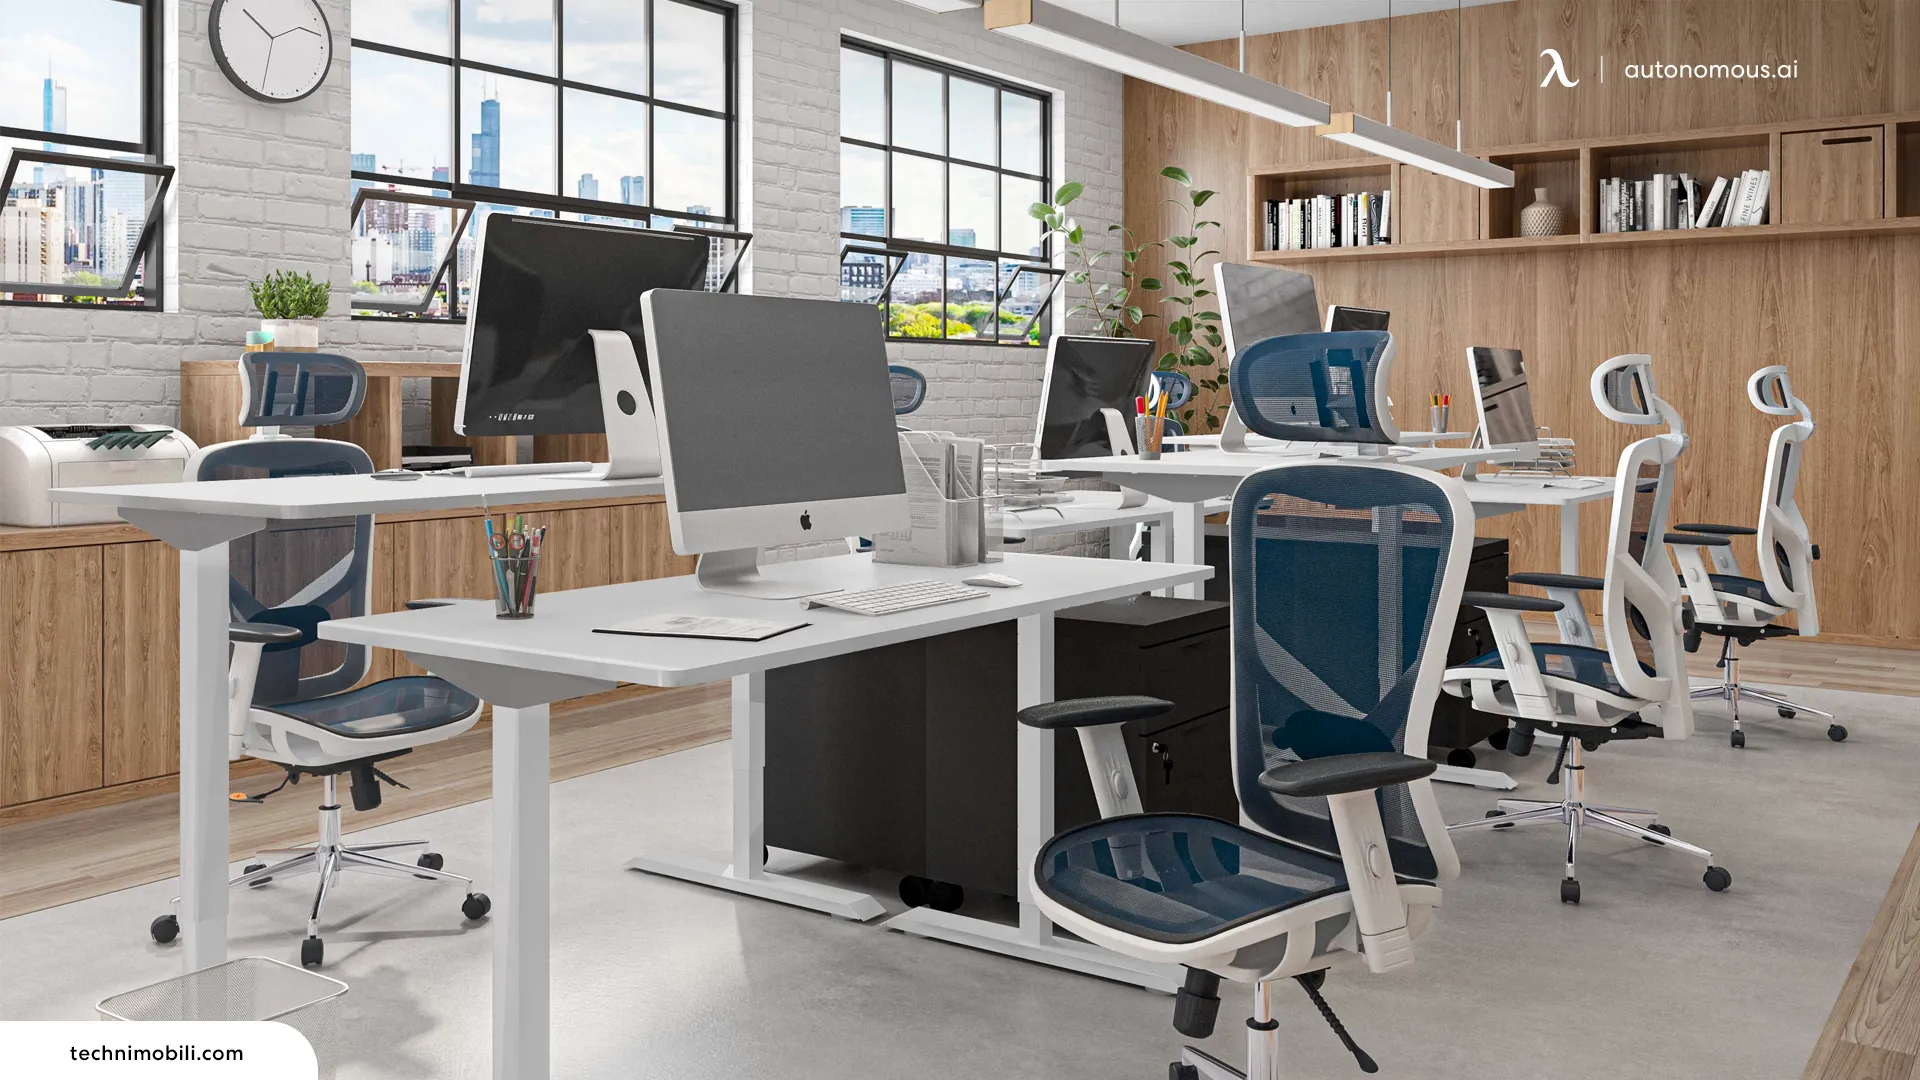 Explore Functional & High-Tech Office Furniture in Corpus Christi